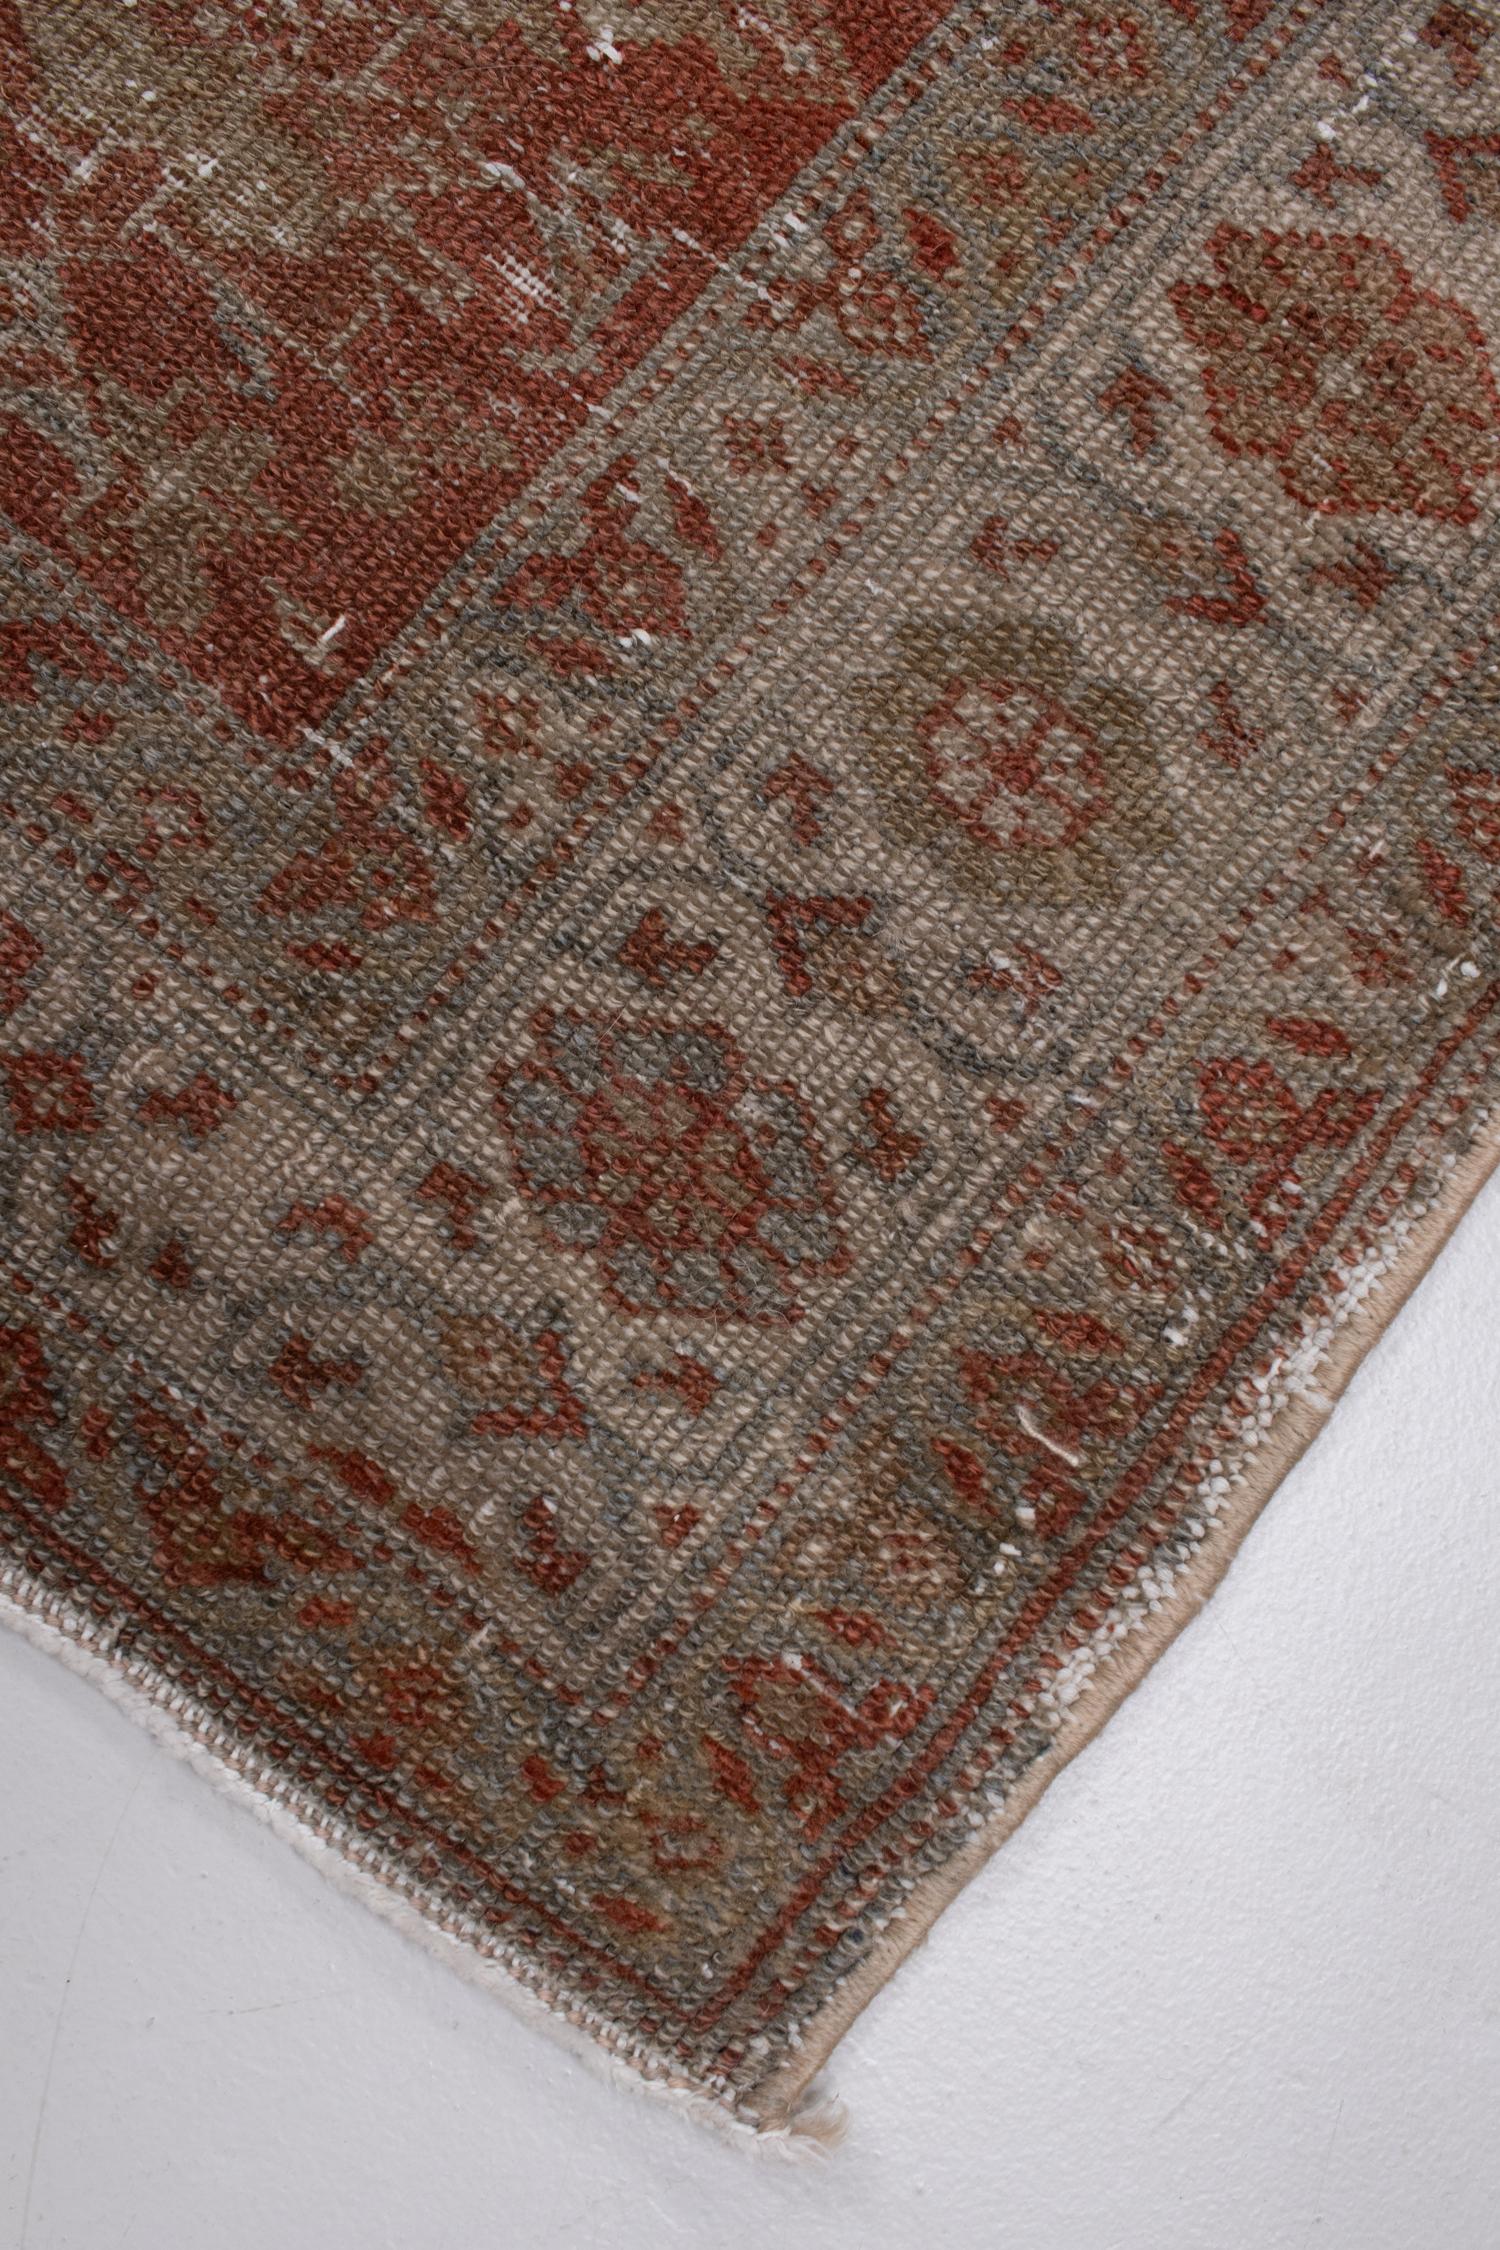 Wool Persian Malayer Runner Rug For Sale